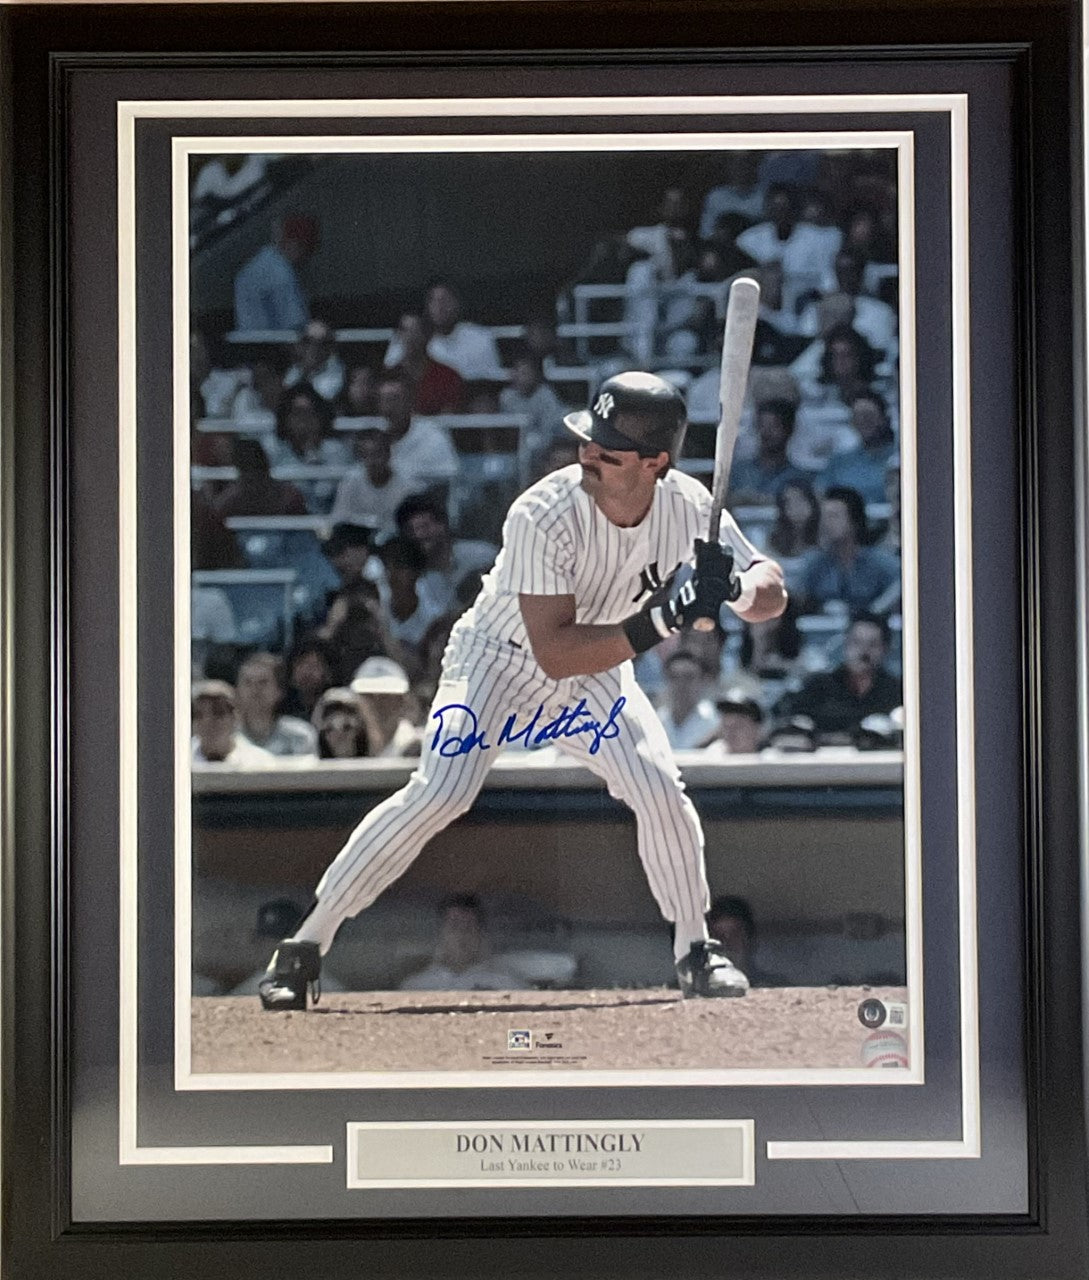 Don Mattingly Autographed and Framed New York Yankees Jersey